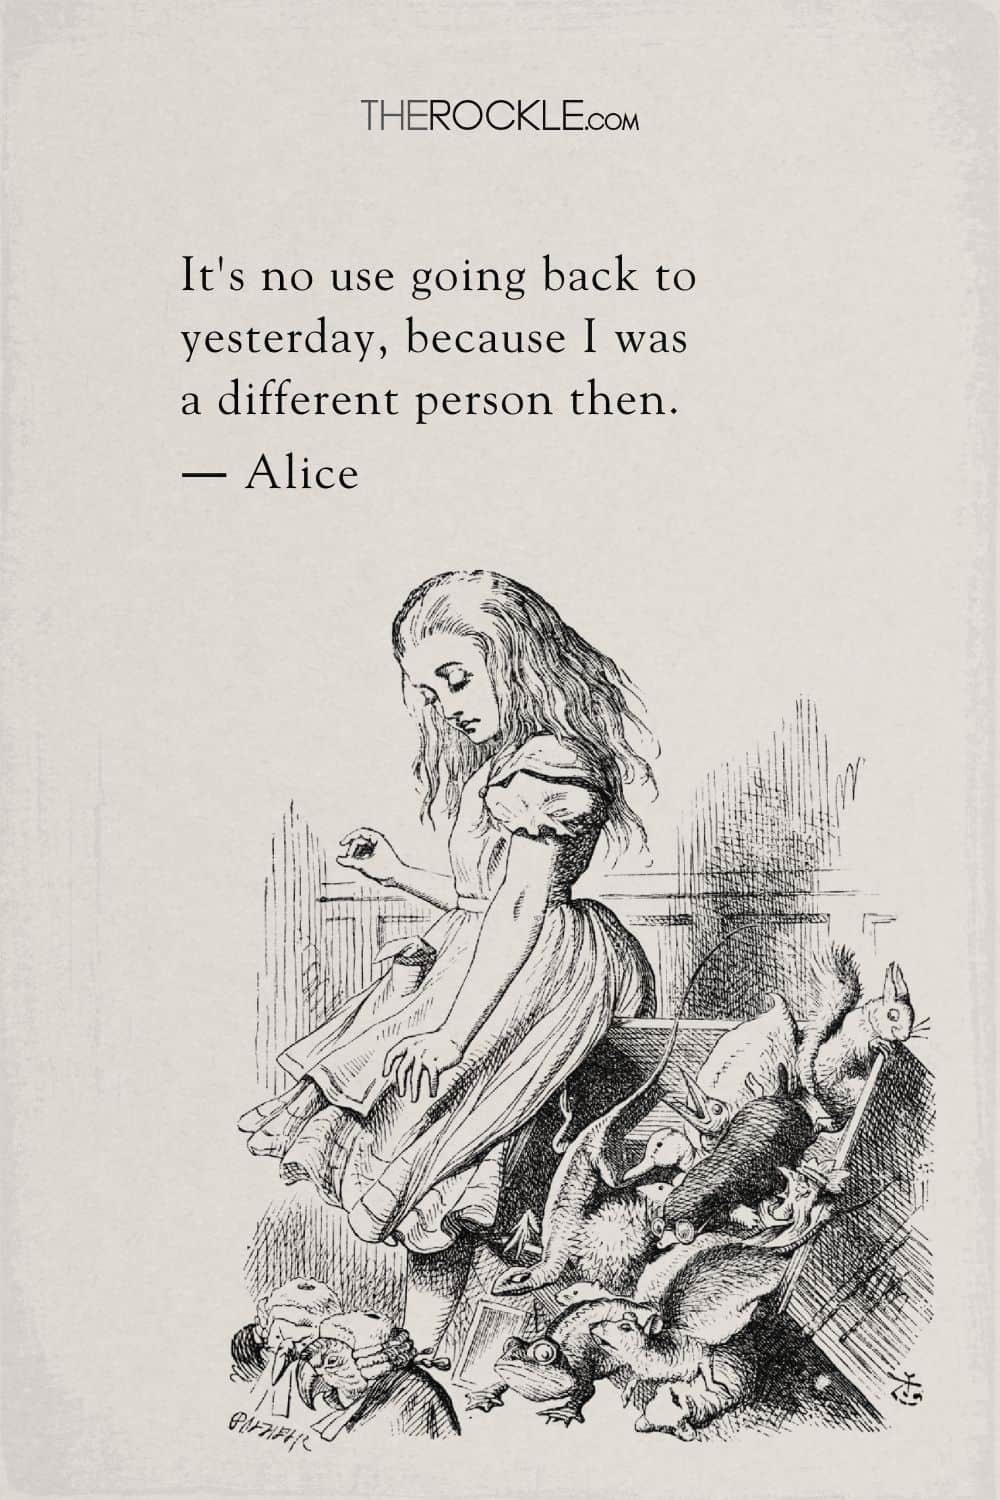 Alice in Wonderland quote on embracing change